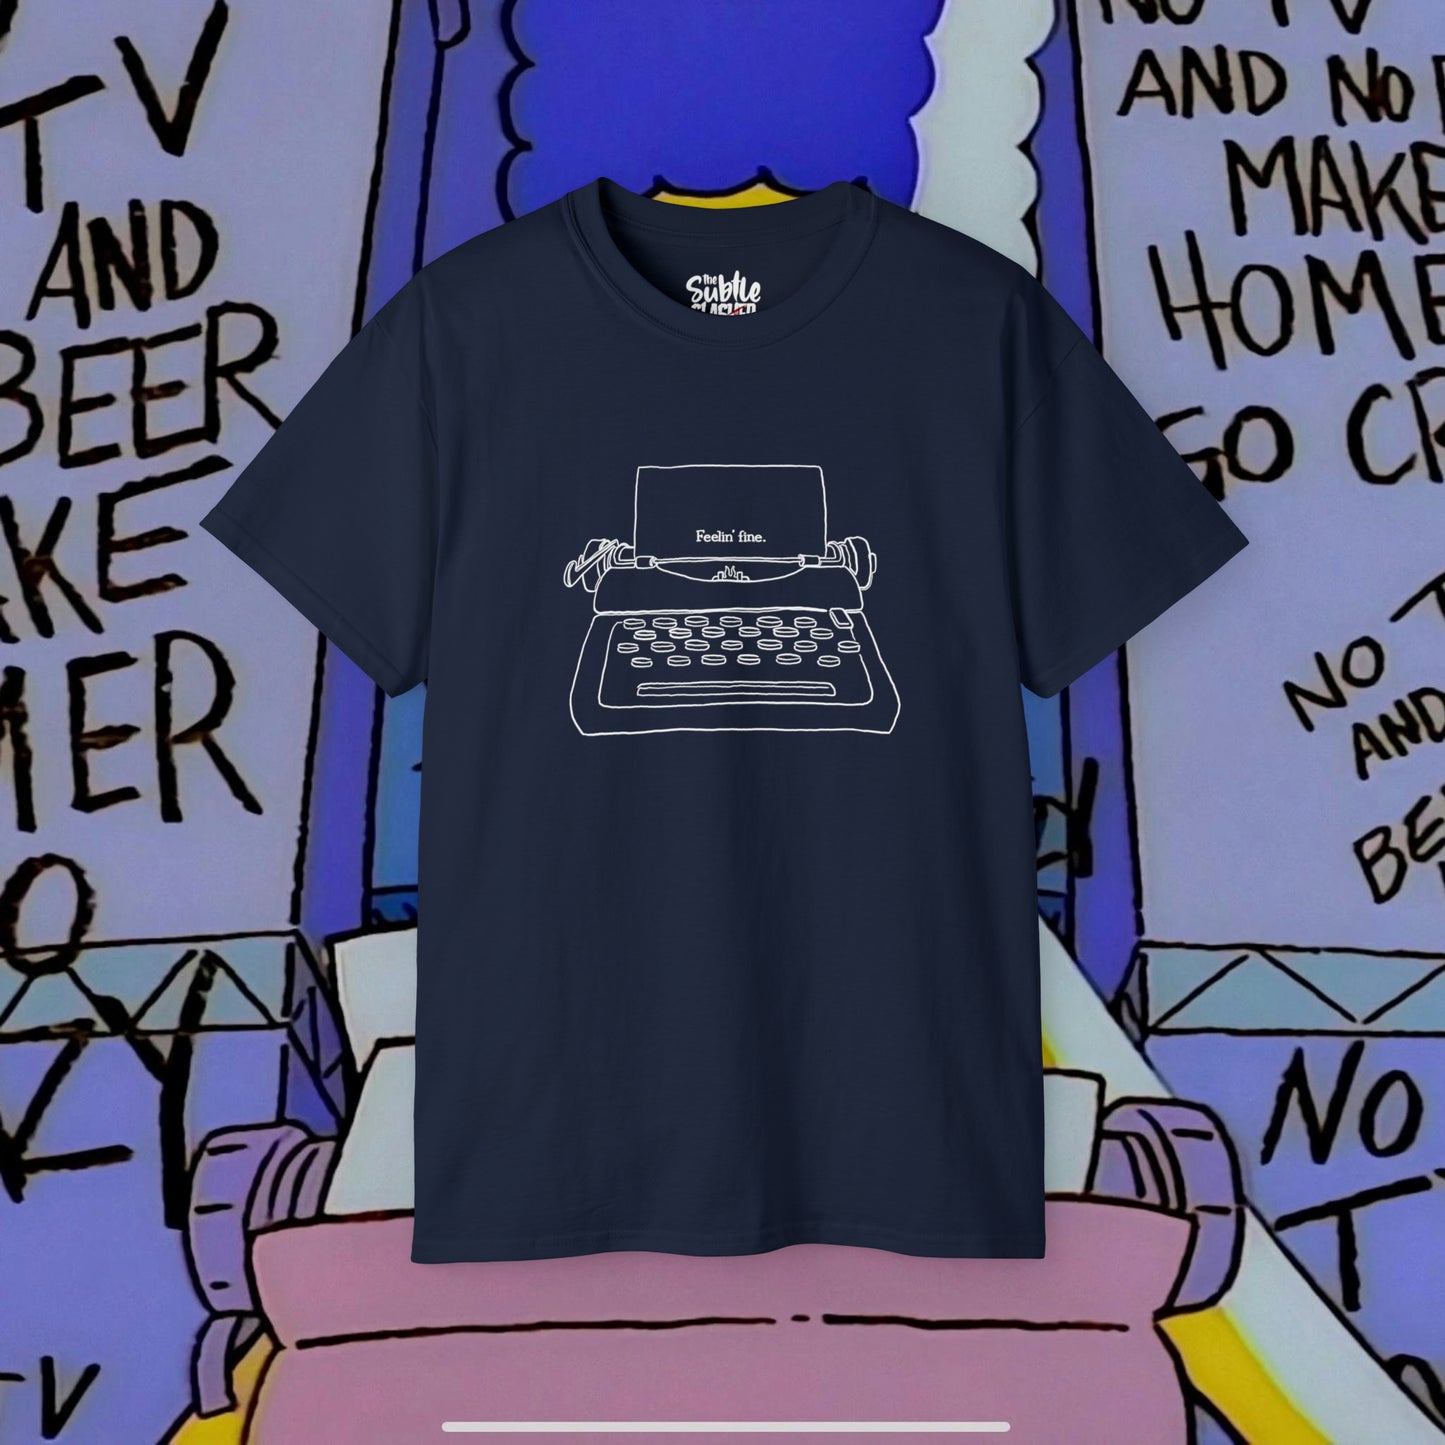 Window To His Madness Tee